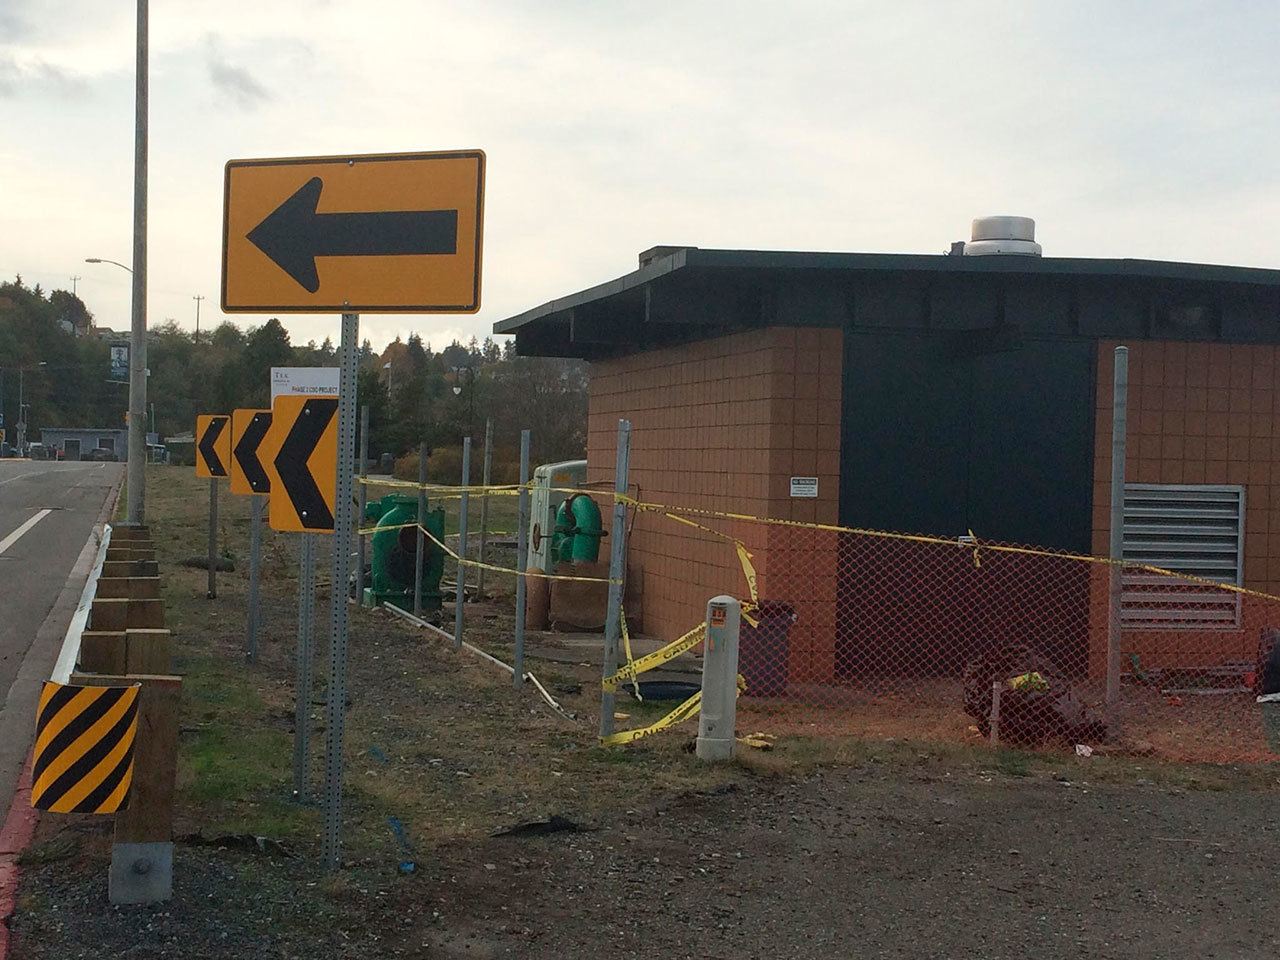 Traffic will be disrupted this week after demolition begins on a five-decade-old pump station on Front Street east of where it changes into Marine Drive. (Paul Gottlieb/Peninsula Daily News)